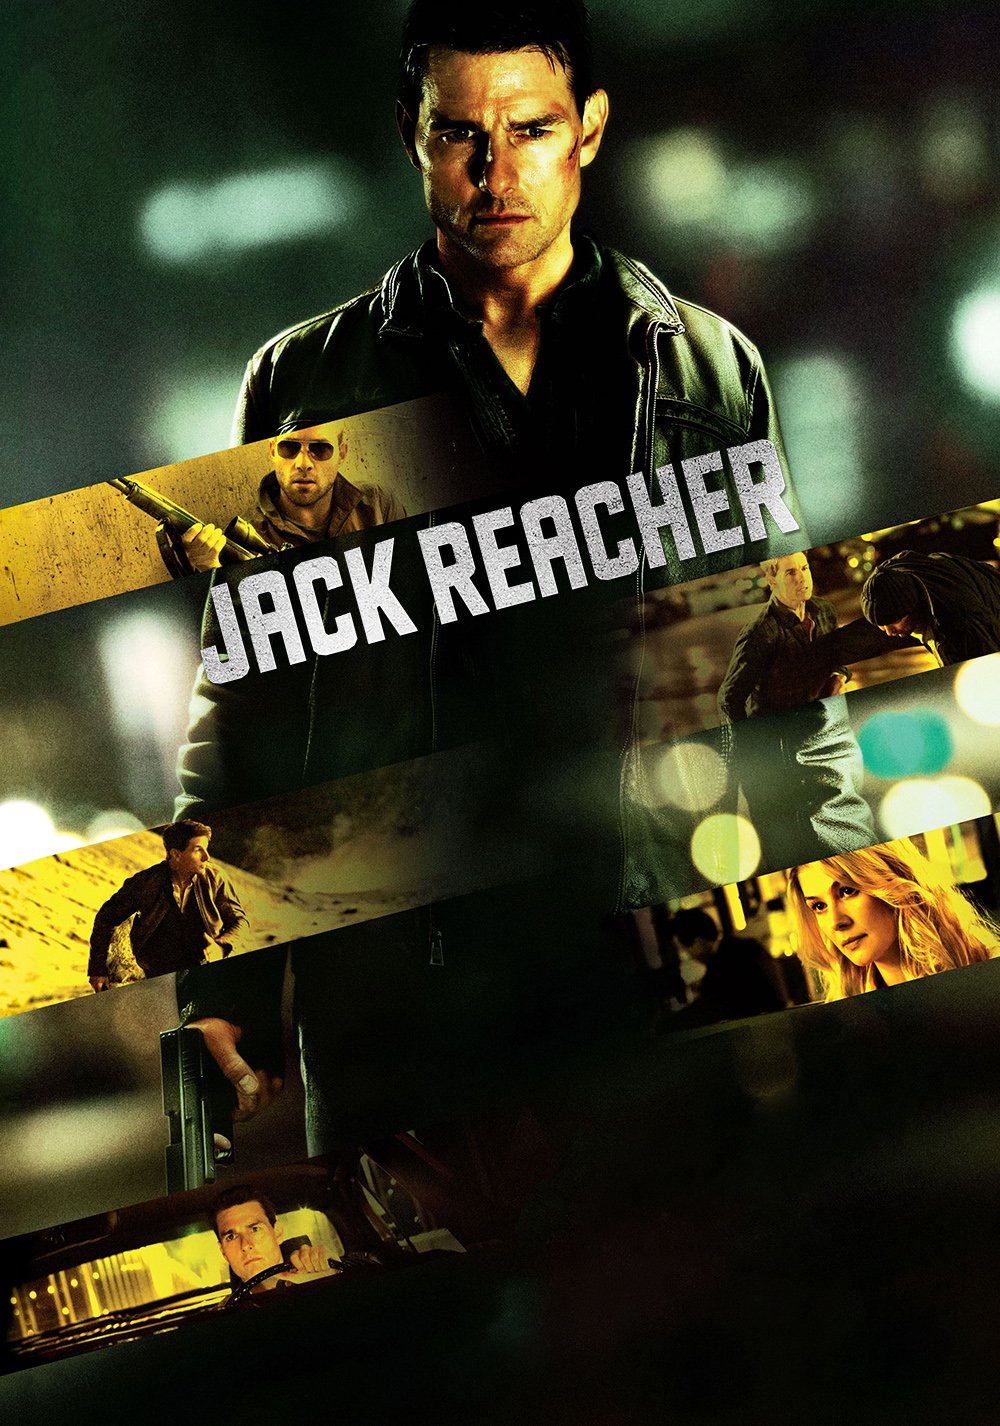 what order are the jack reacher films in